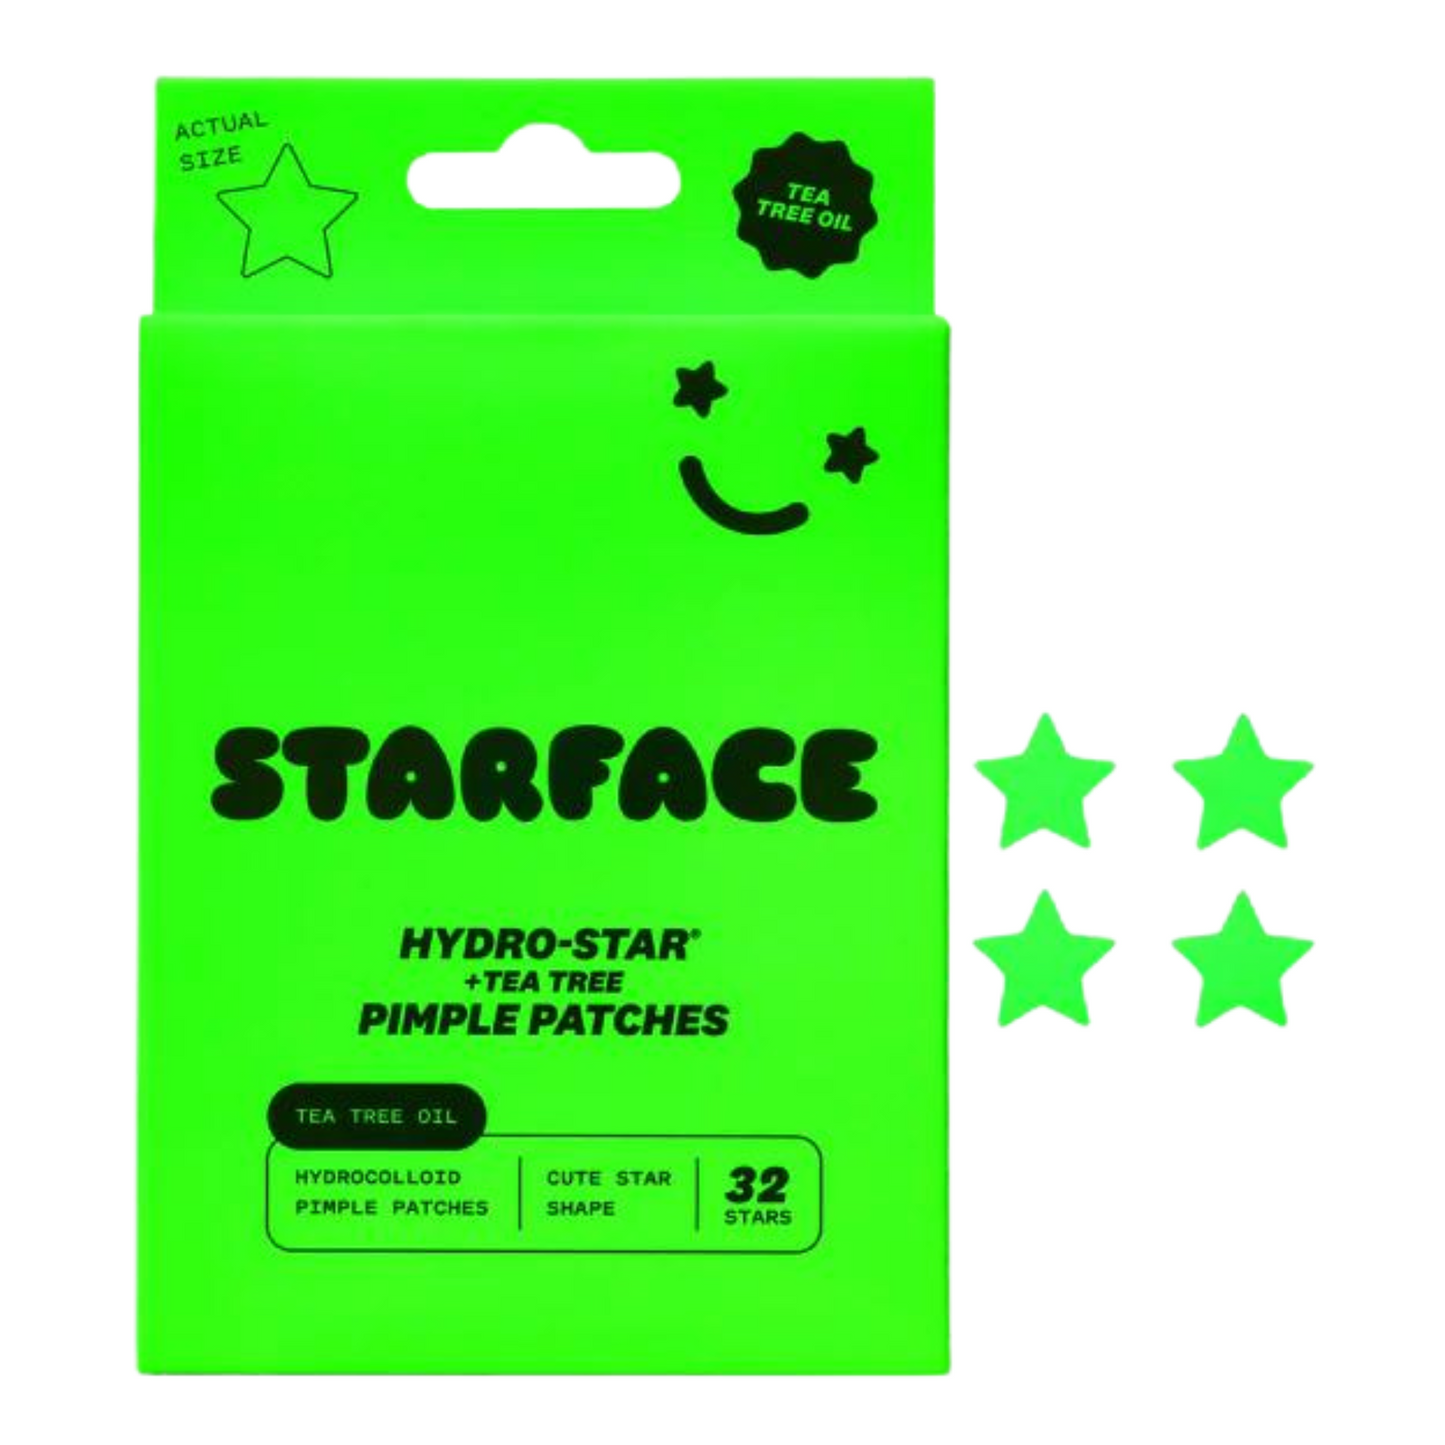 Starface Hydro-Star + Tea Tree Pimple Patches